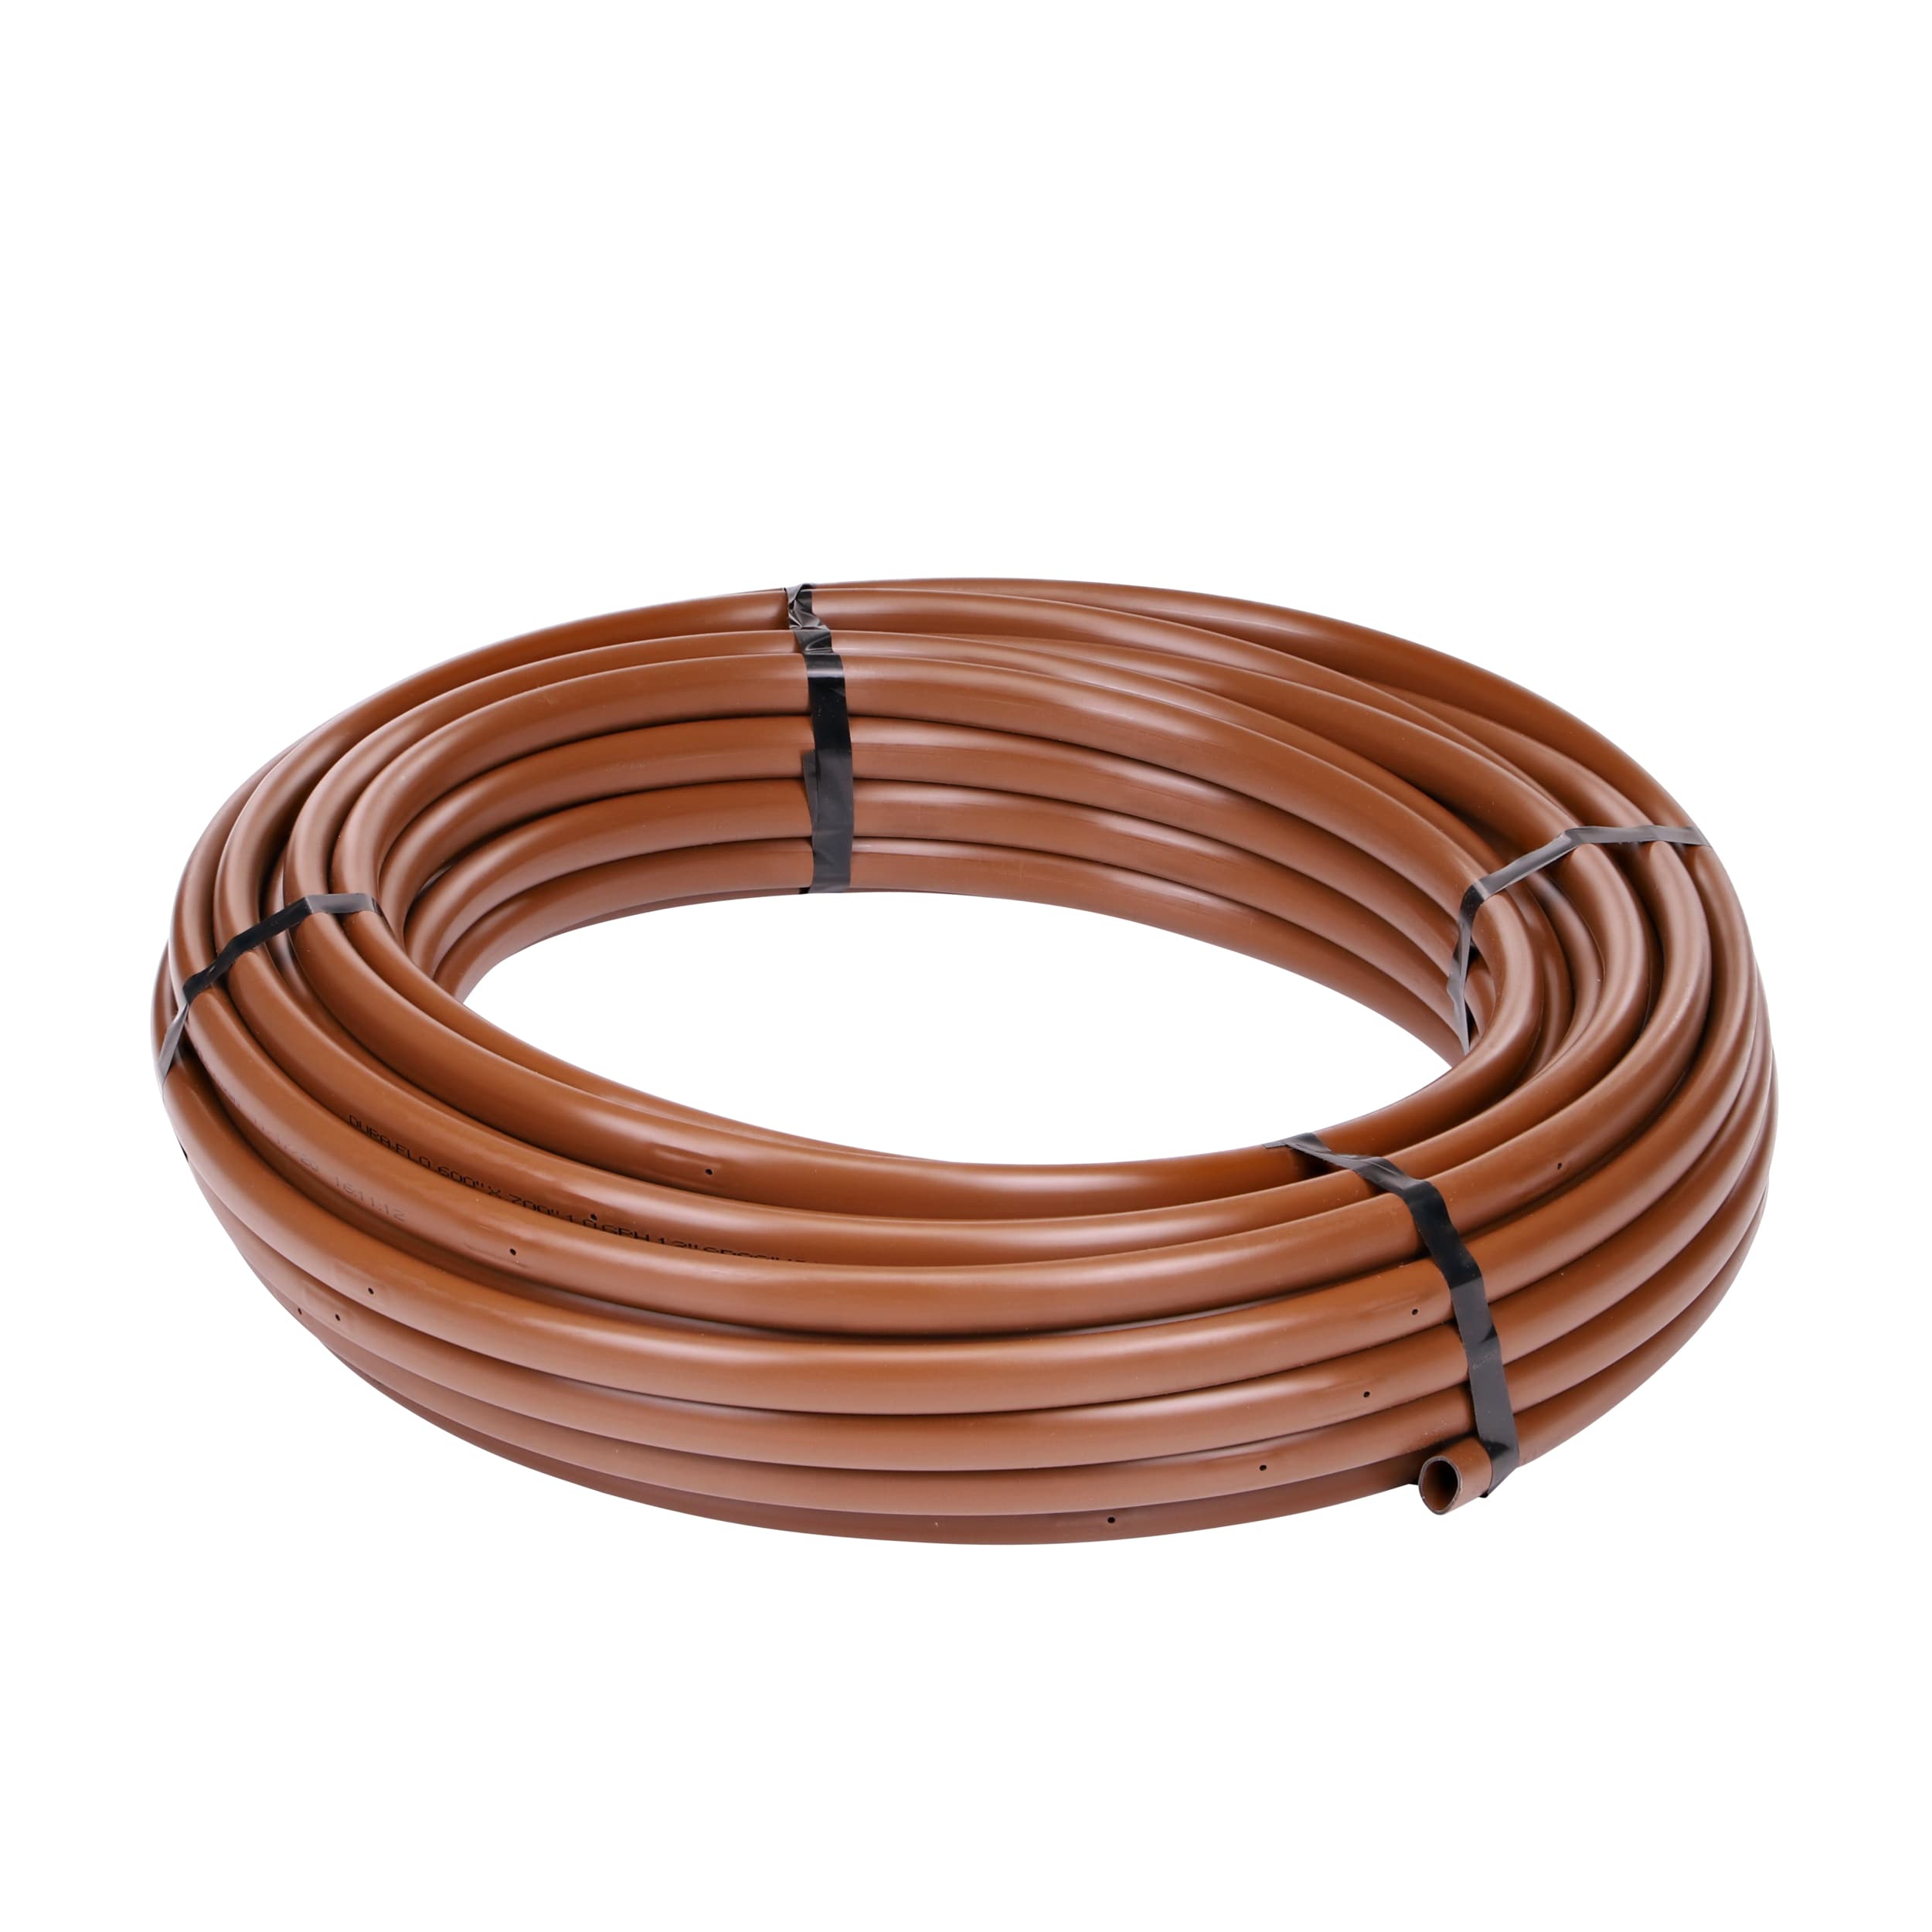 Raindrip 5/8-in x 100-ft Drip Irrigation Emitter Tubing in the 